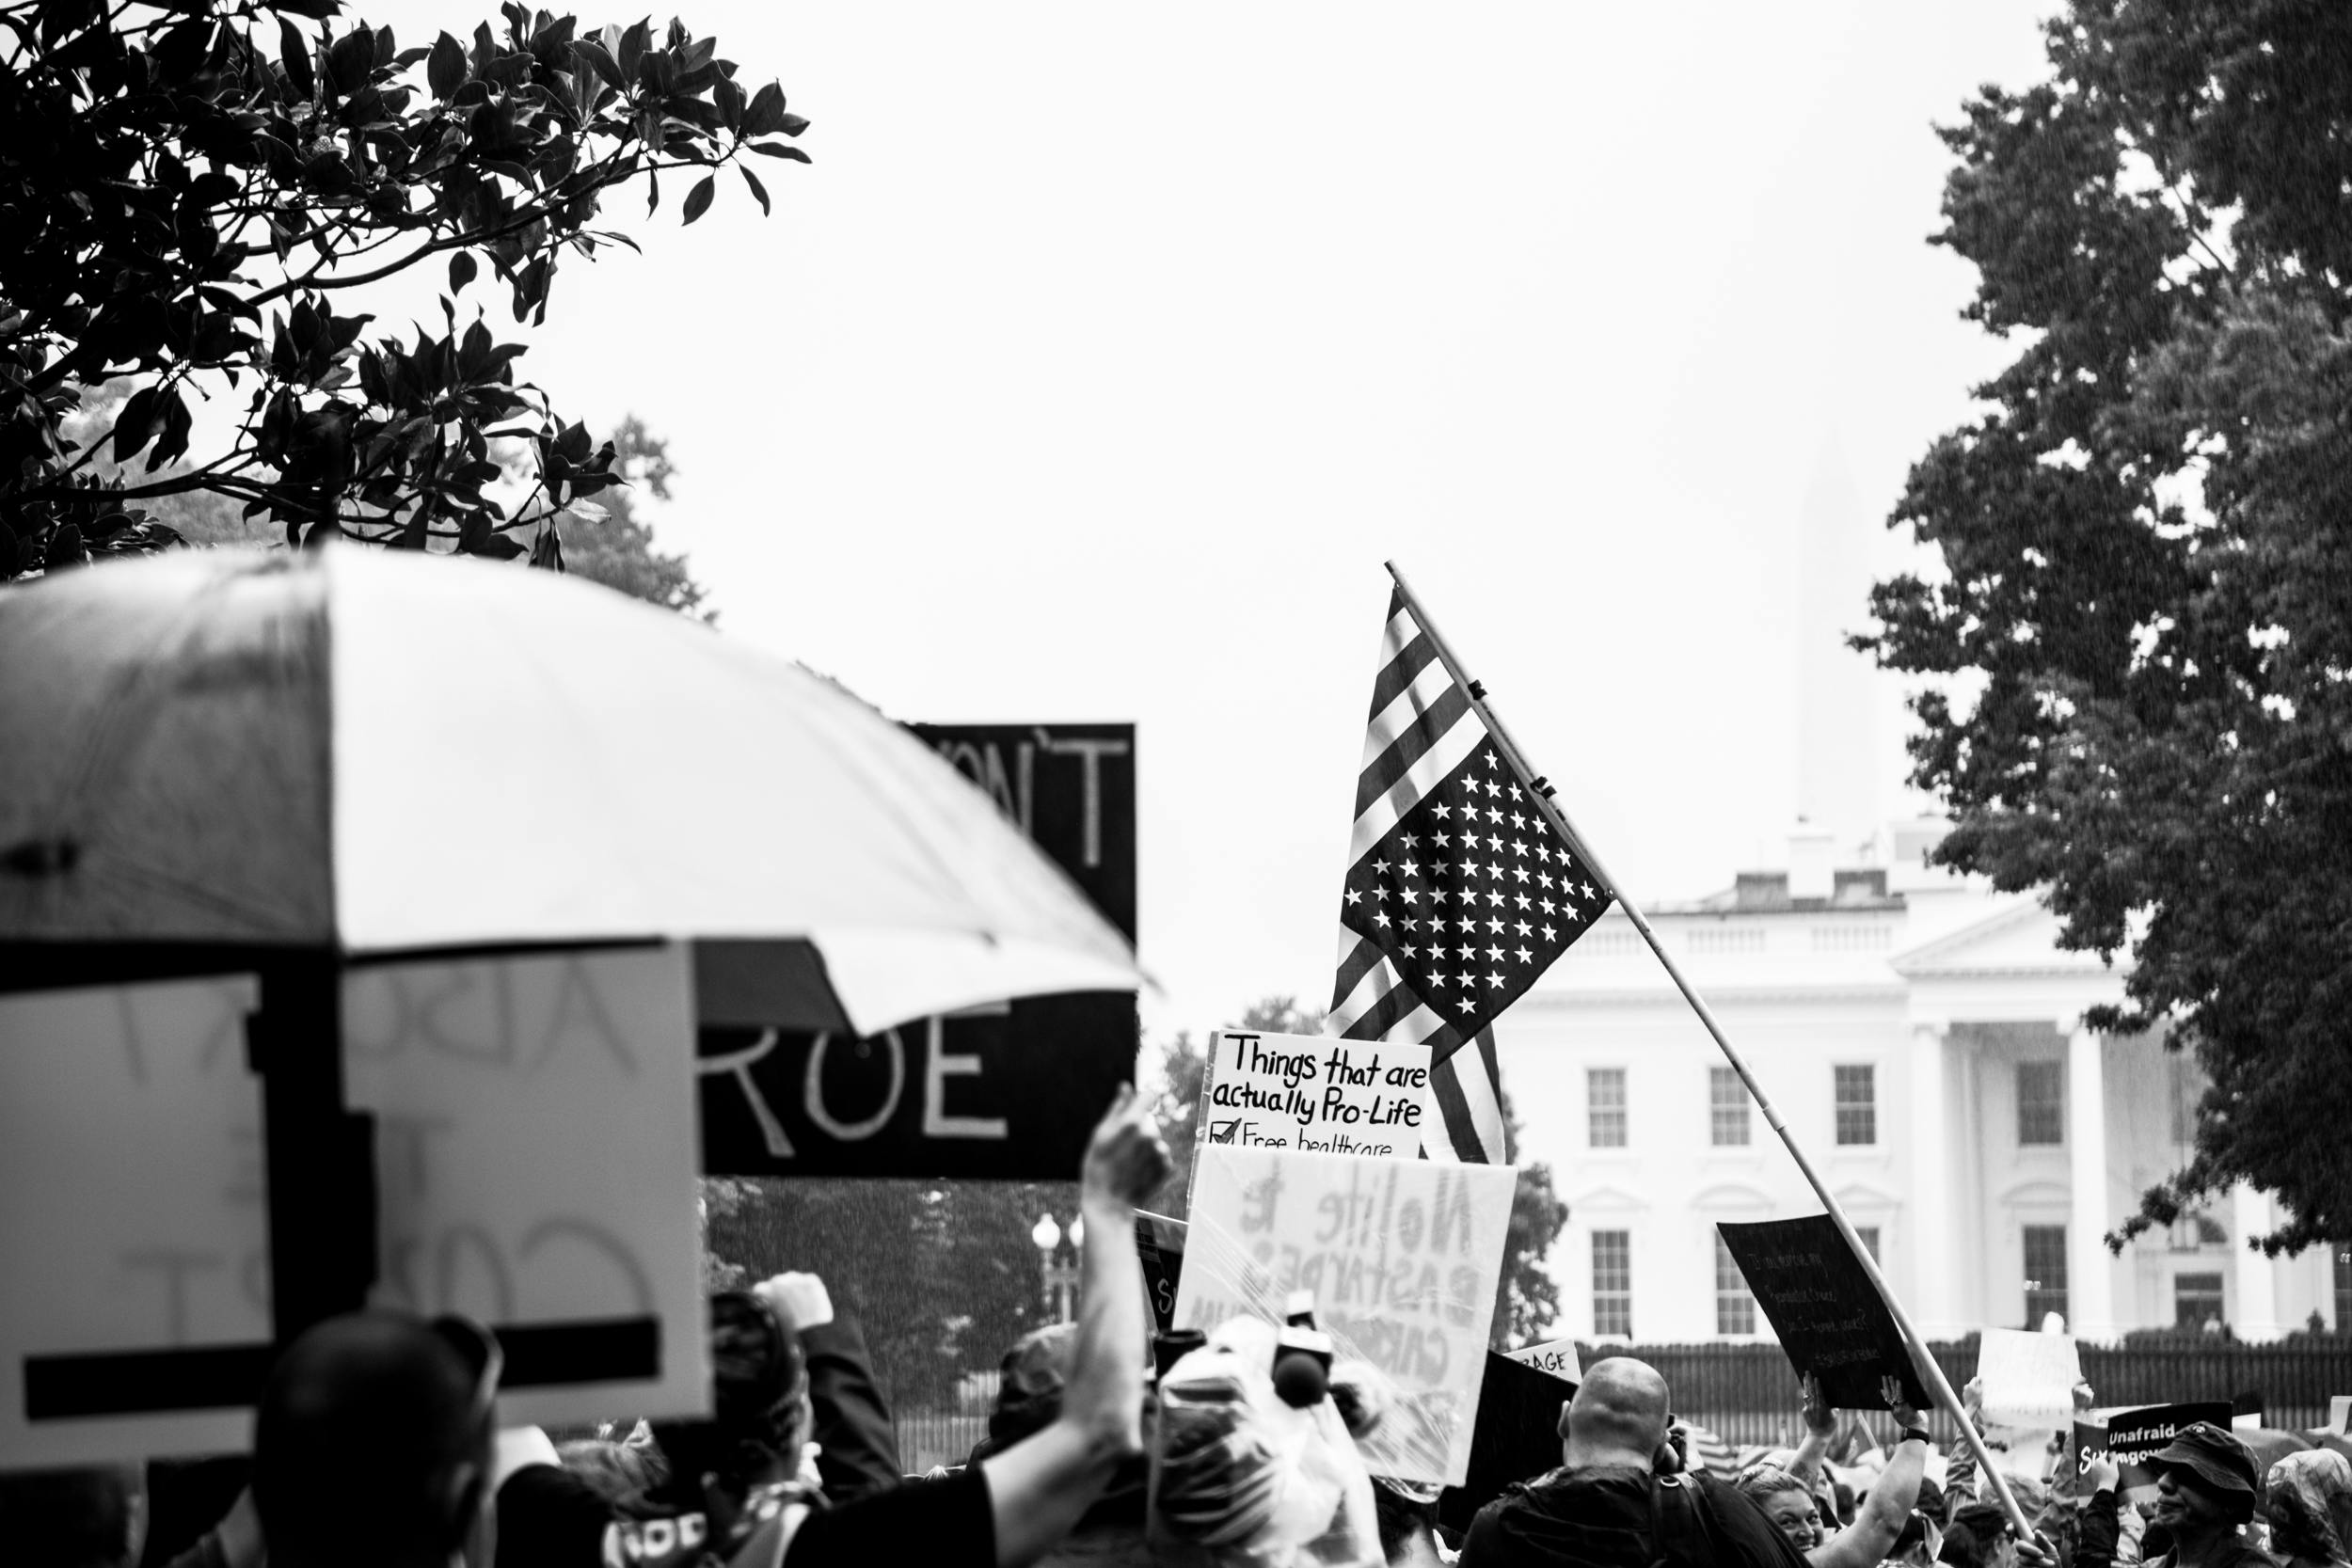 As the march approached the White House, the collective anger and energy rose significantly and the march split into those who were engaging in civil disobedience and those bearing witness from a safe distance.